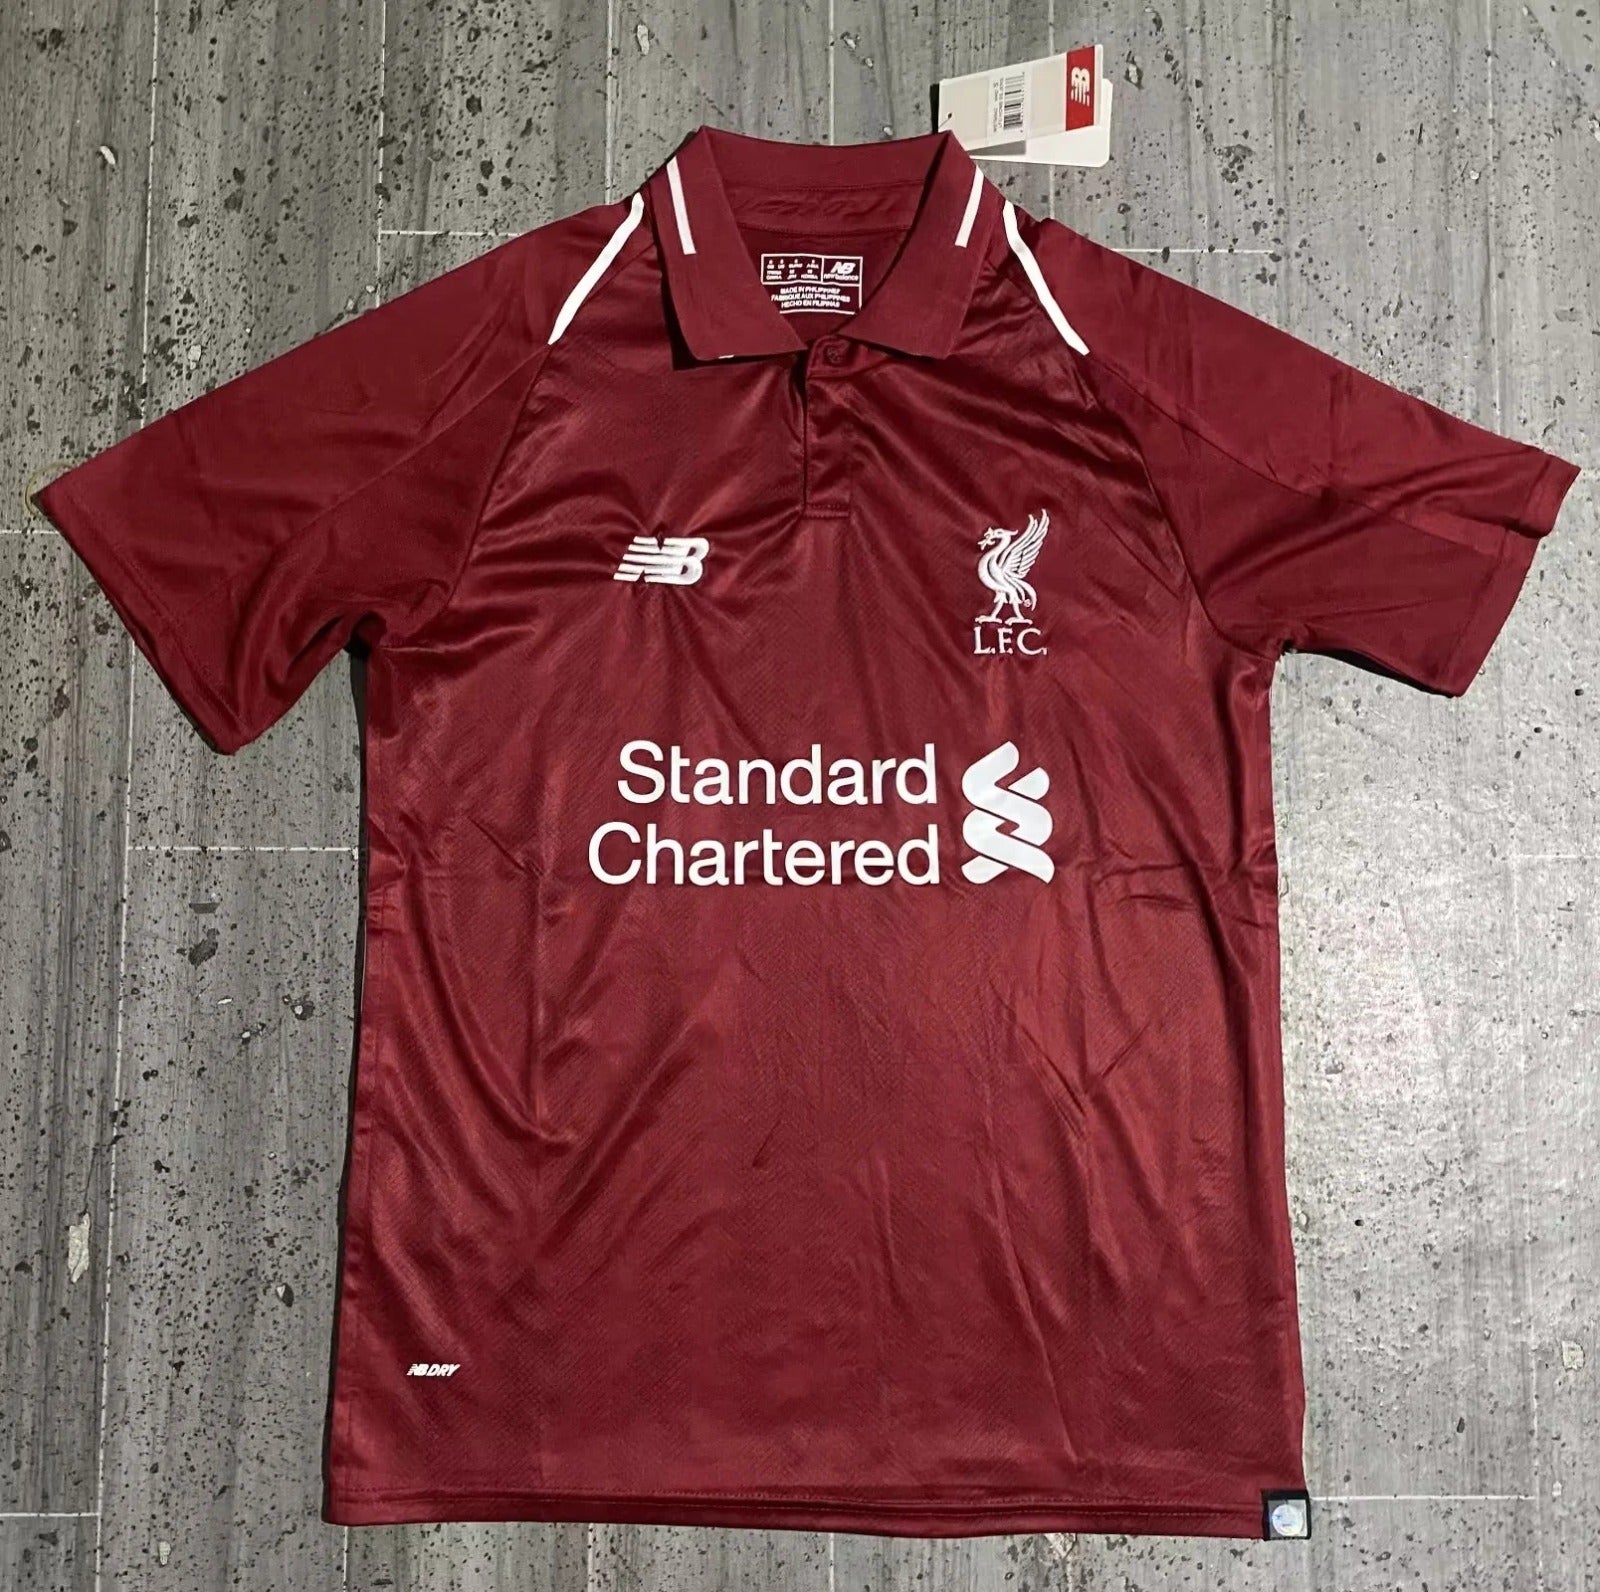 Producto: Liverpool 2018/19 Local